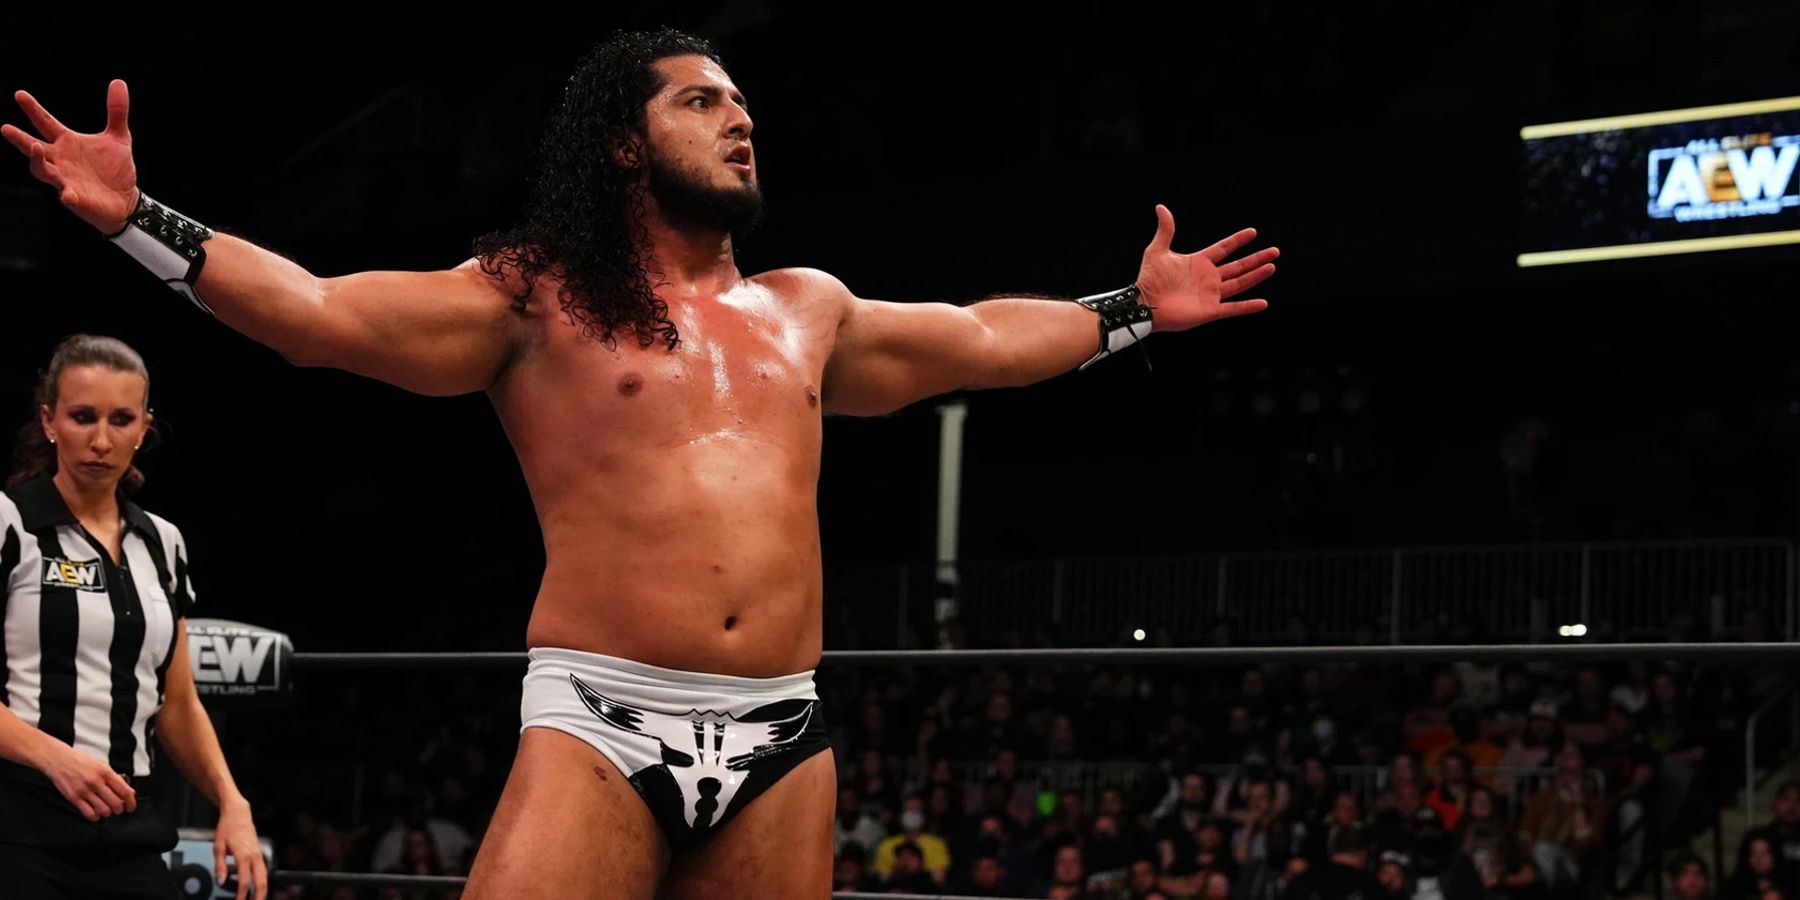 Rush plays to the crowd during a match against Hangman Adam Page for AEW in 2022.